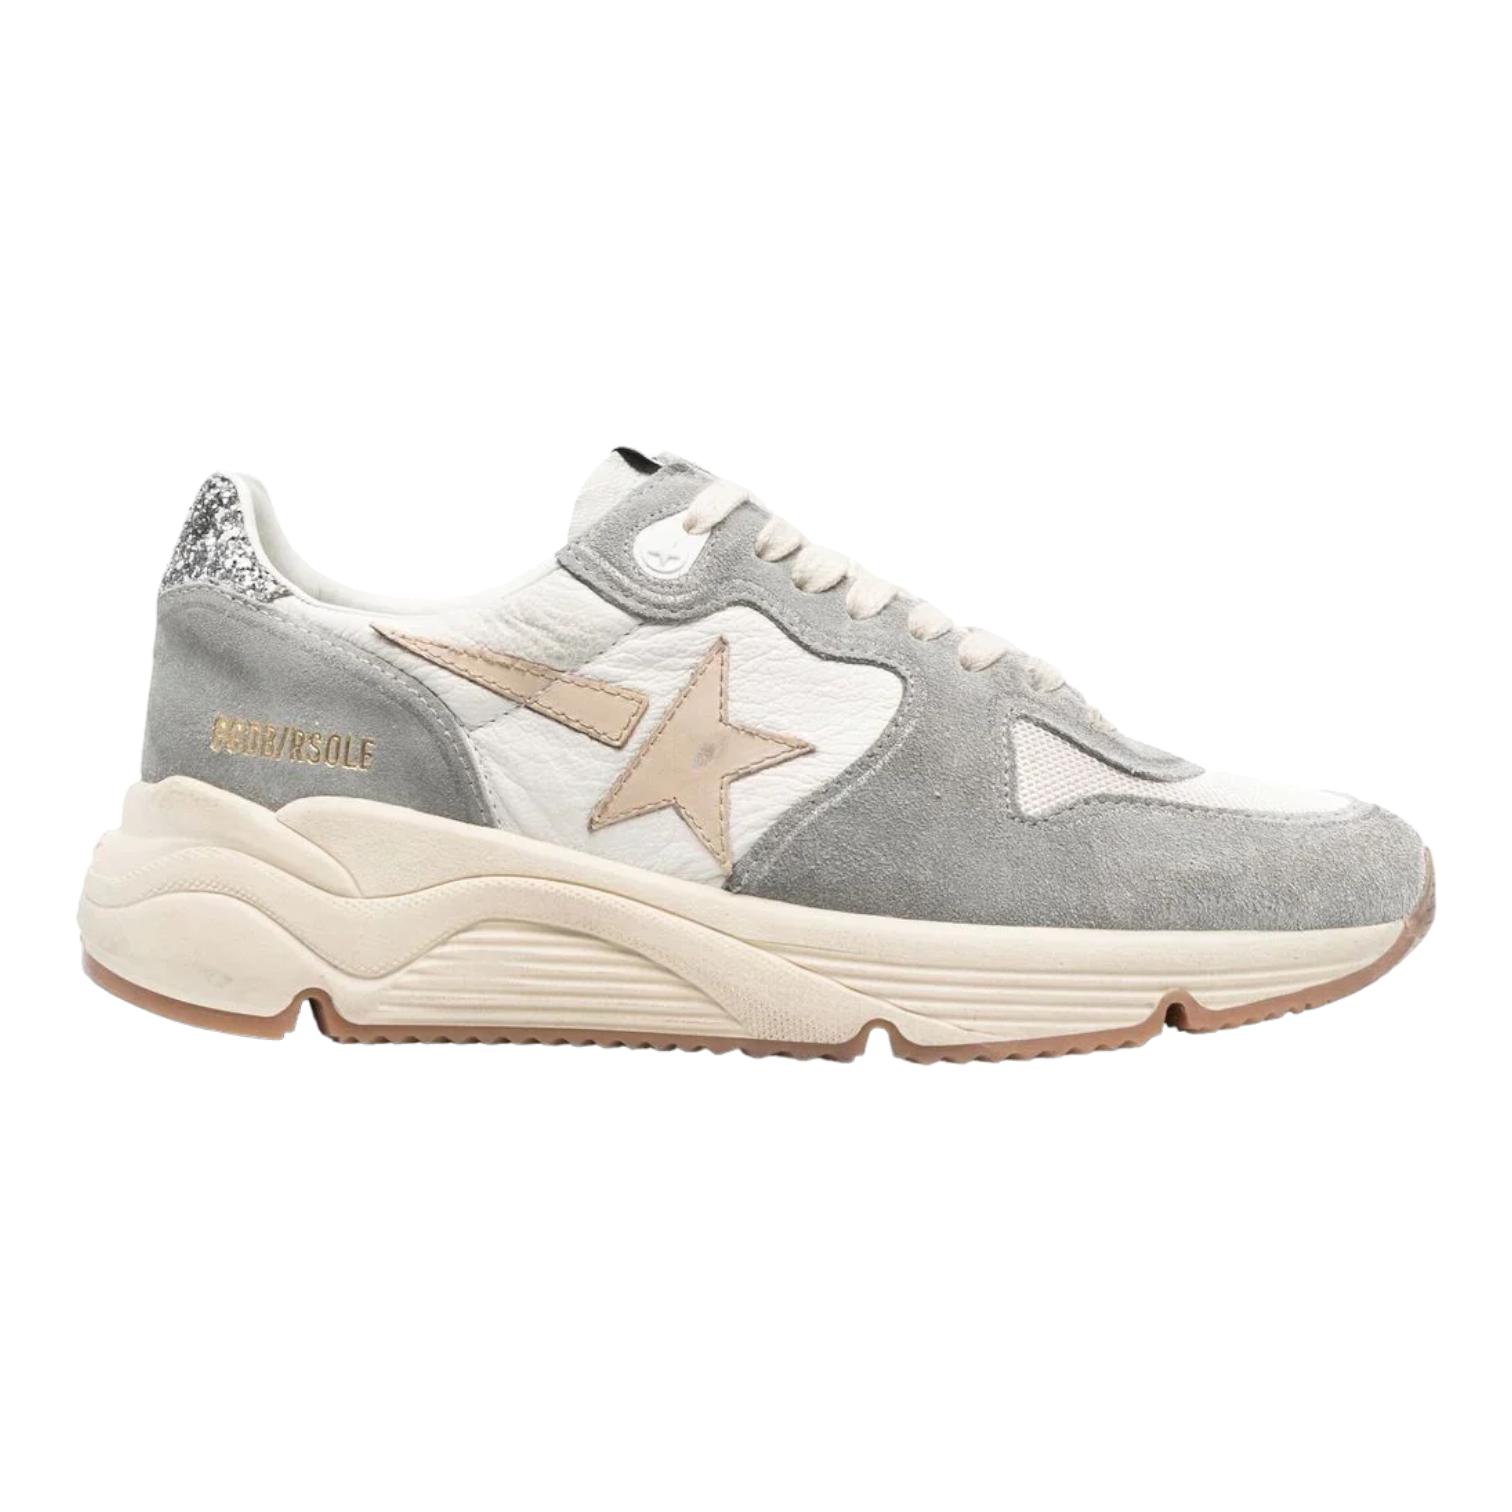 Golden Goose Running Sole Nappa Upper Suede Toe And Spur  Gwf00126.f004174.60405 in White | Lyst